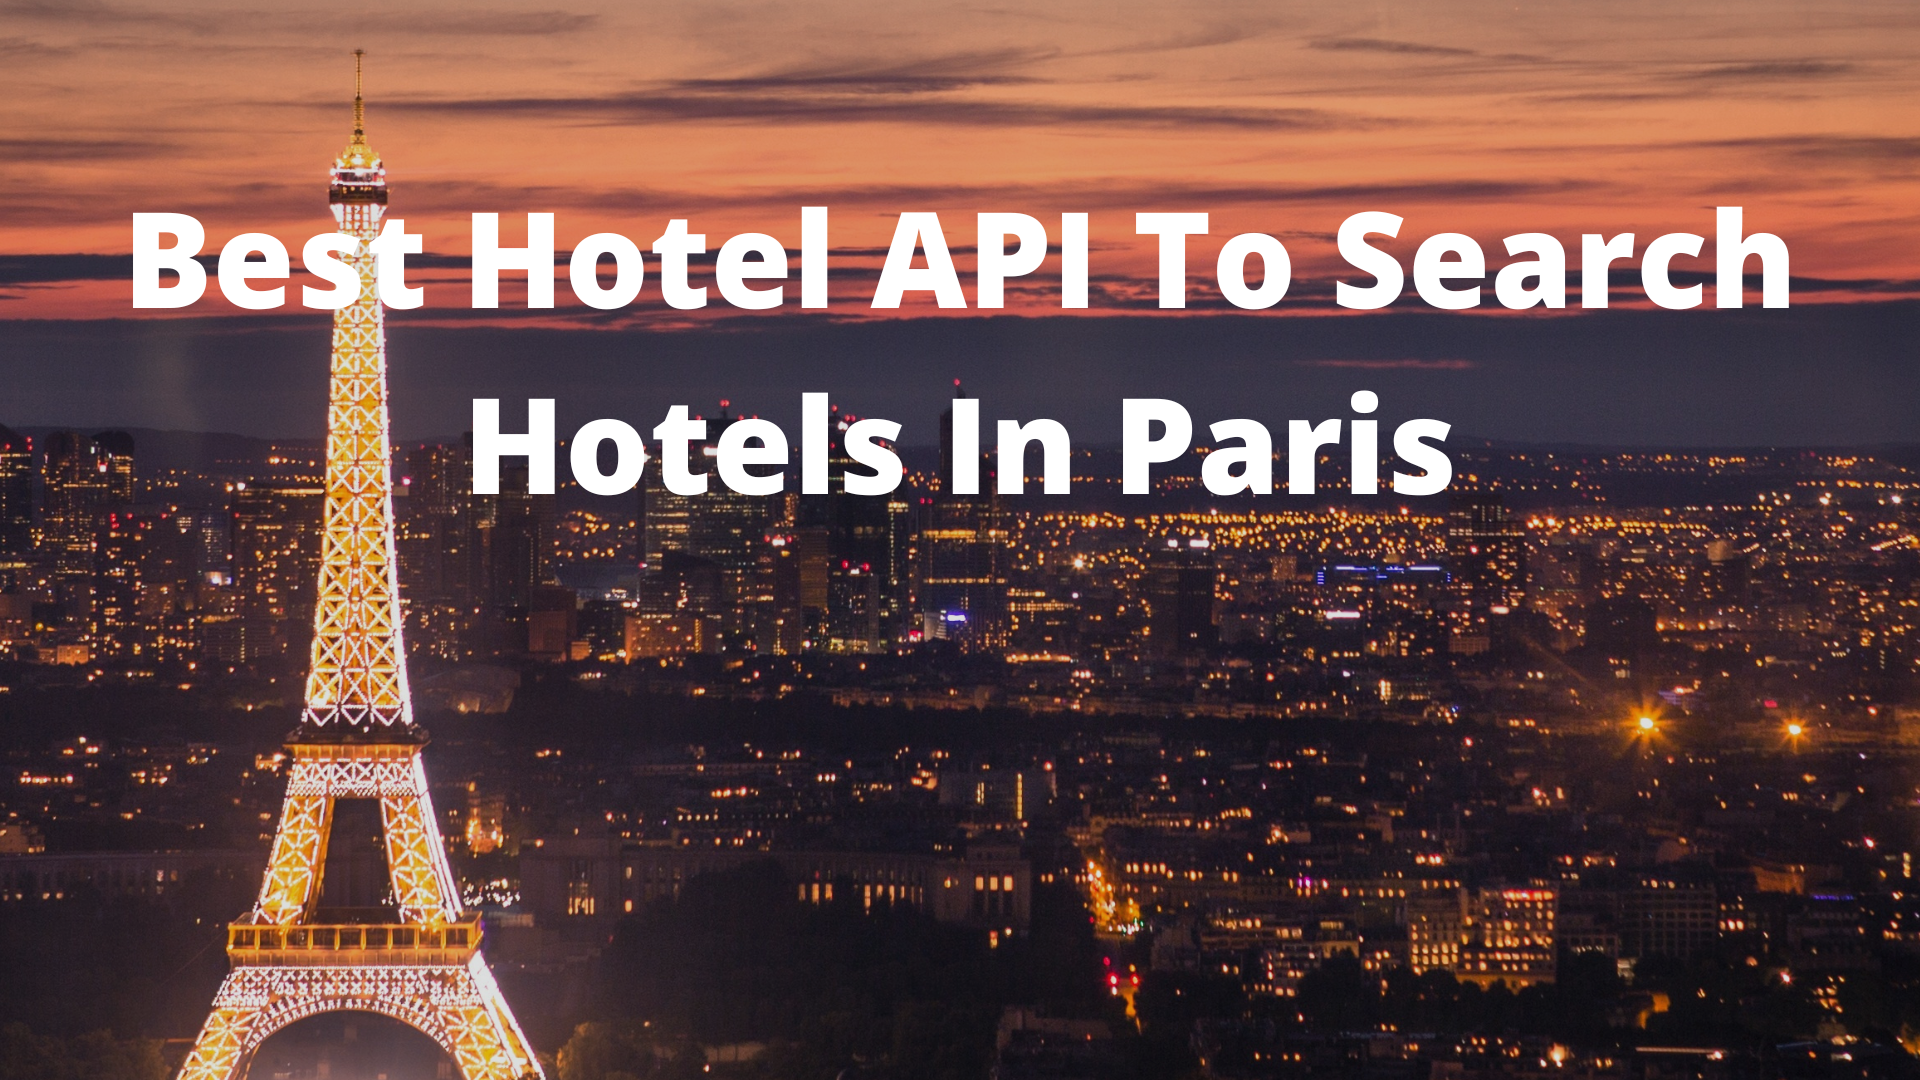 Best Hotel API To Search Hotels In Paris